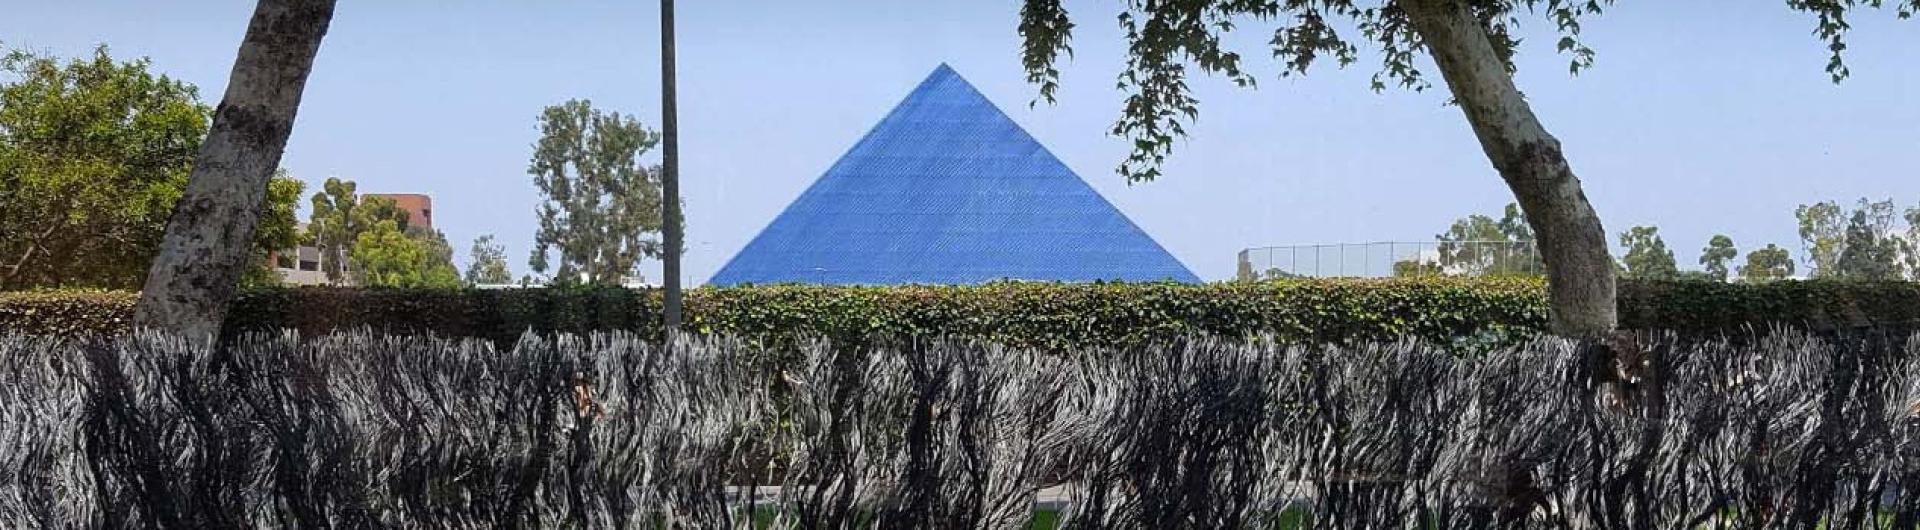 Walter pyramid view from the distance